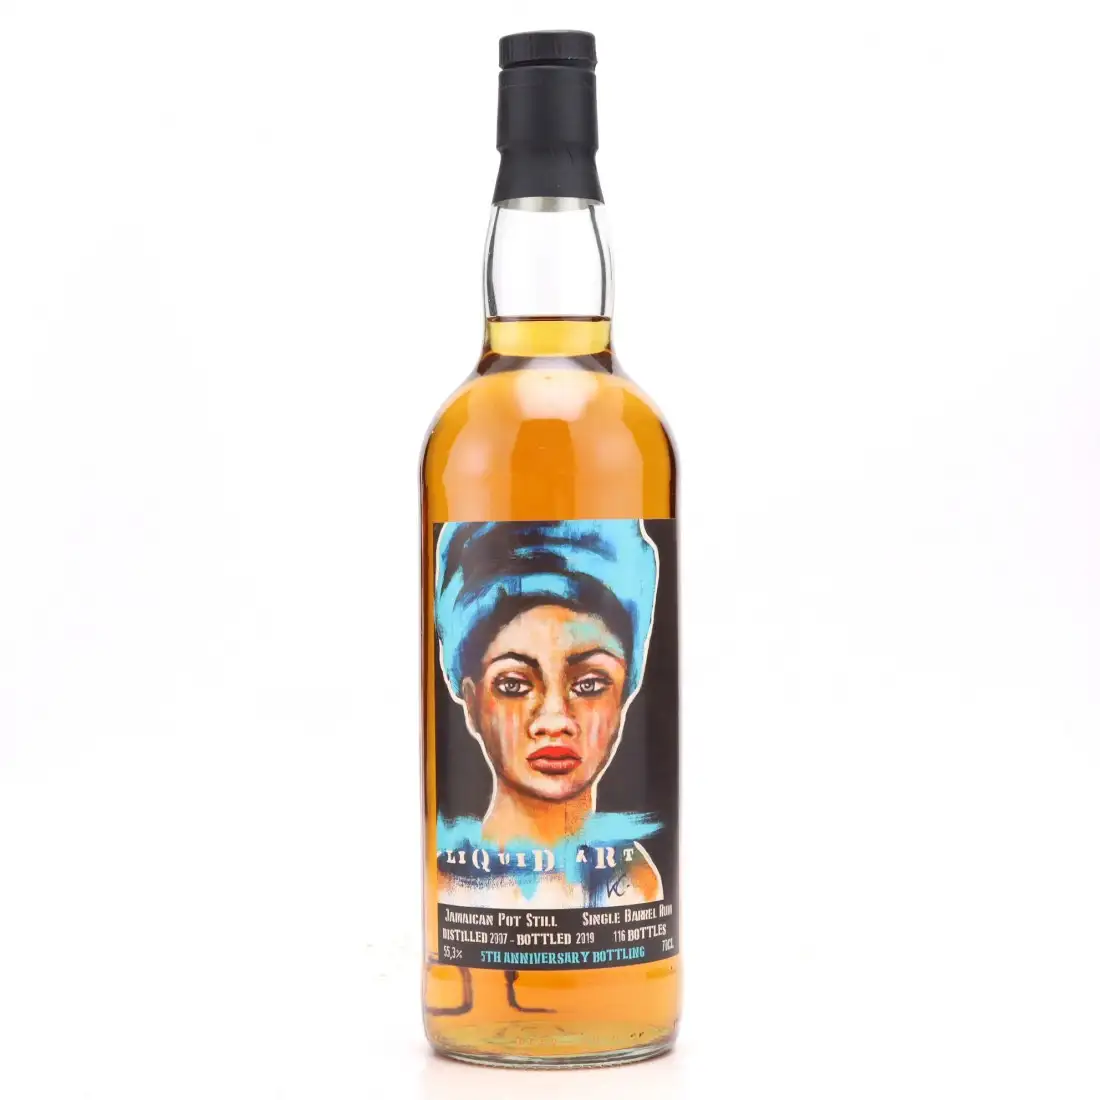 Image of the front of the bottle of the rum Liquid Art Jamaica 5th Anniversary